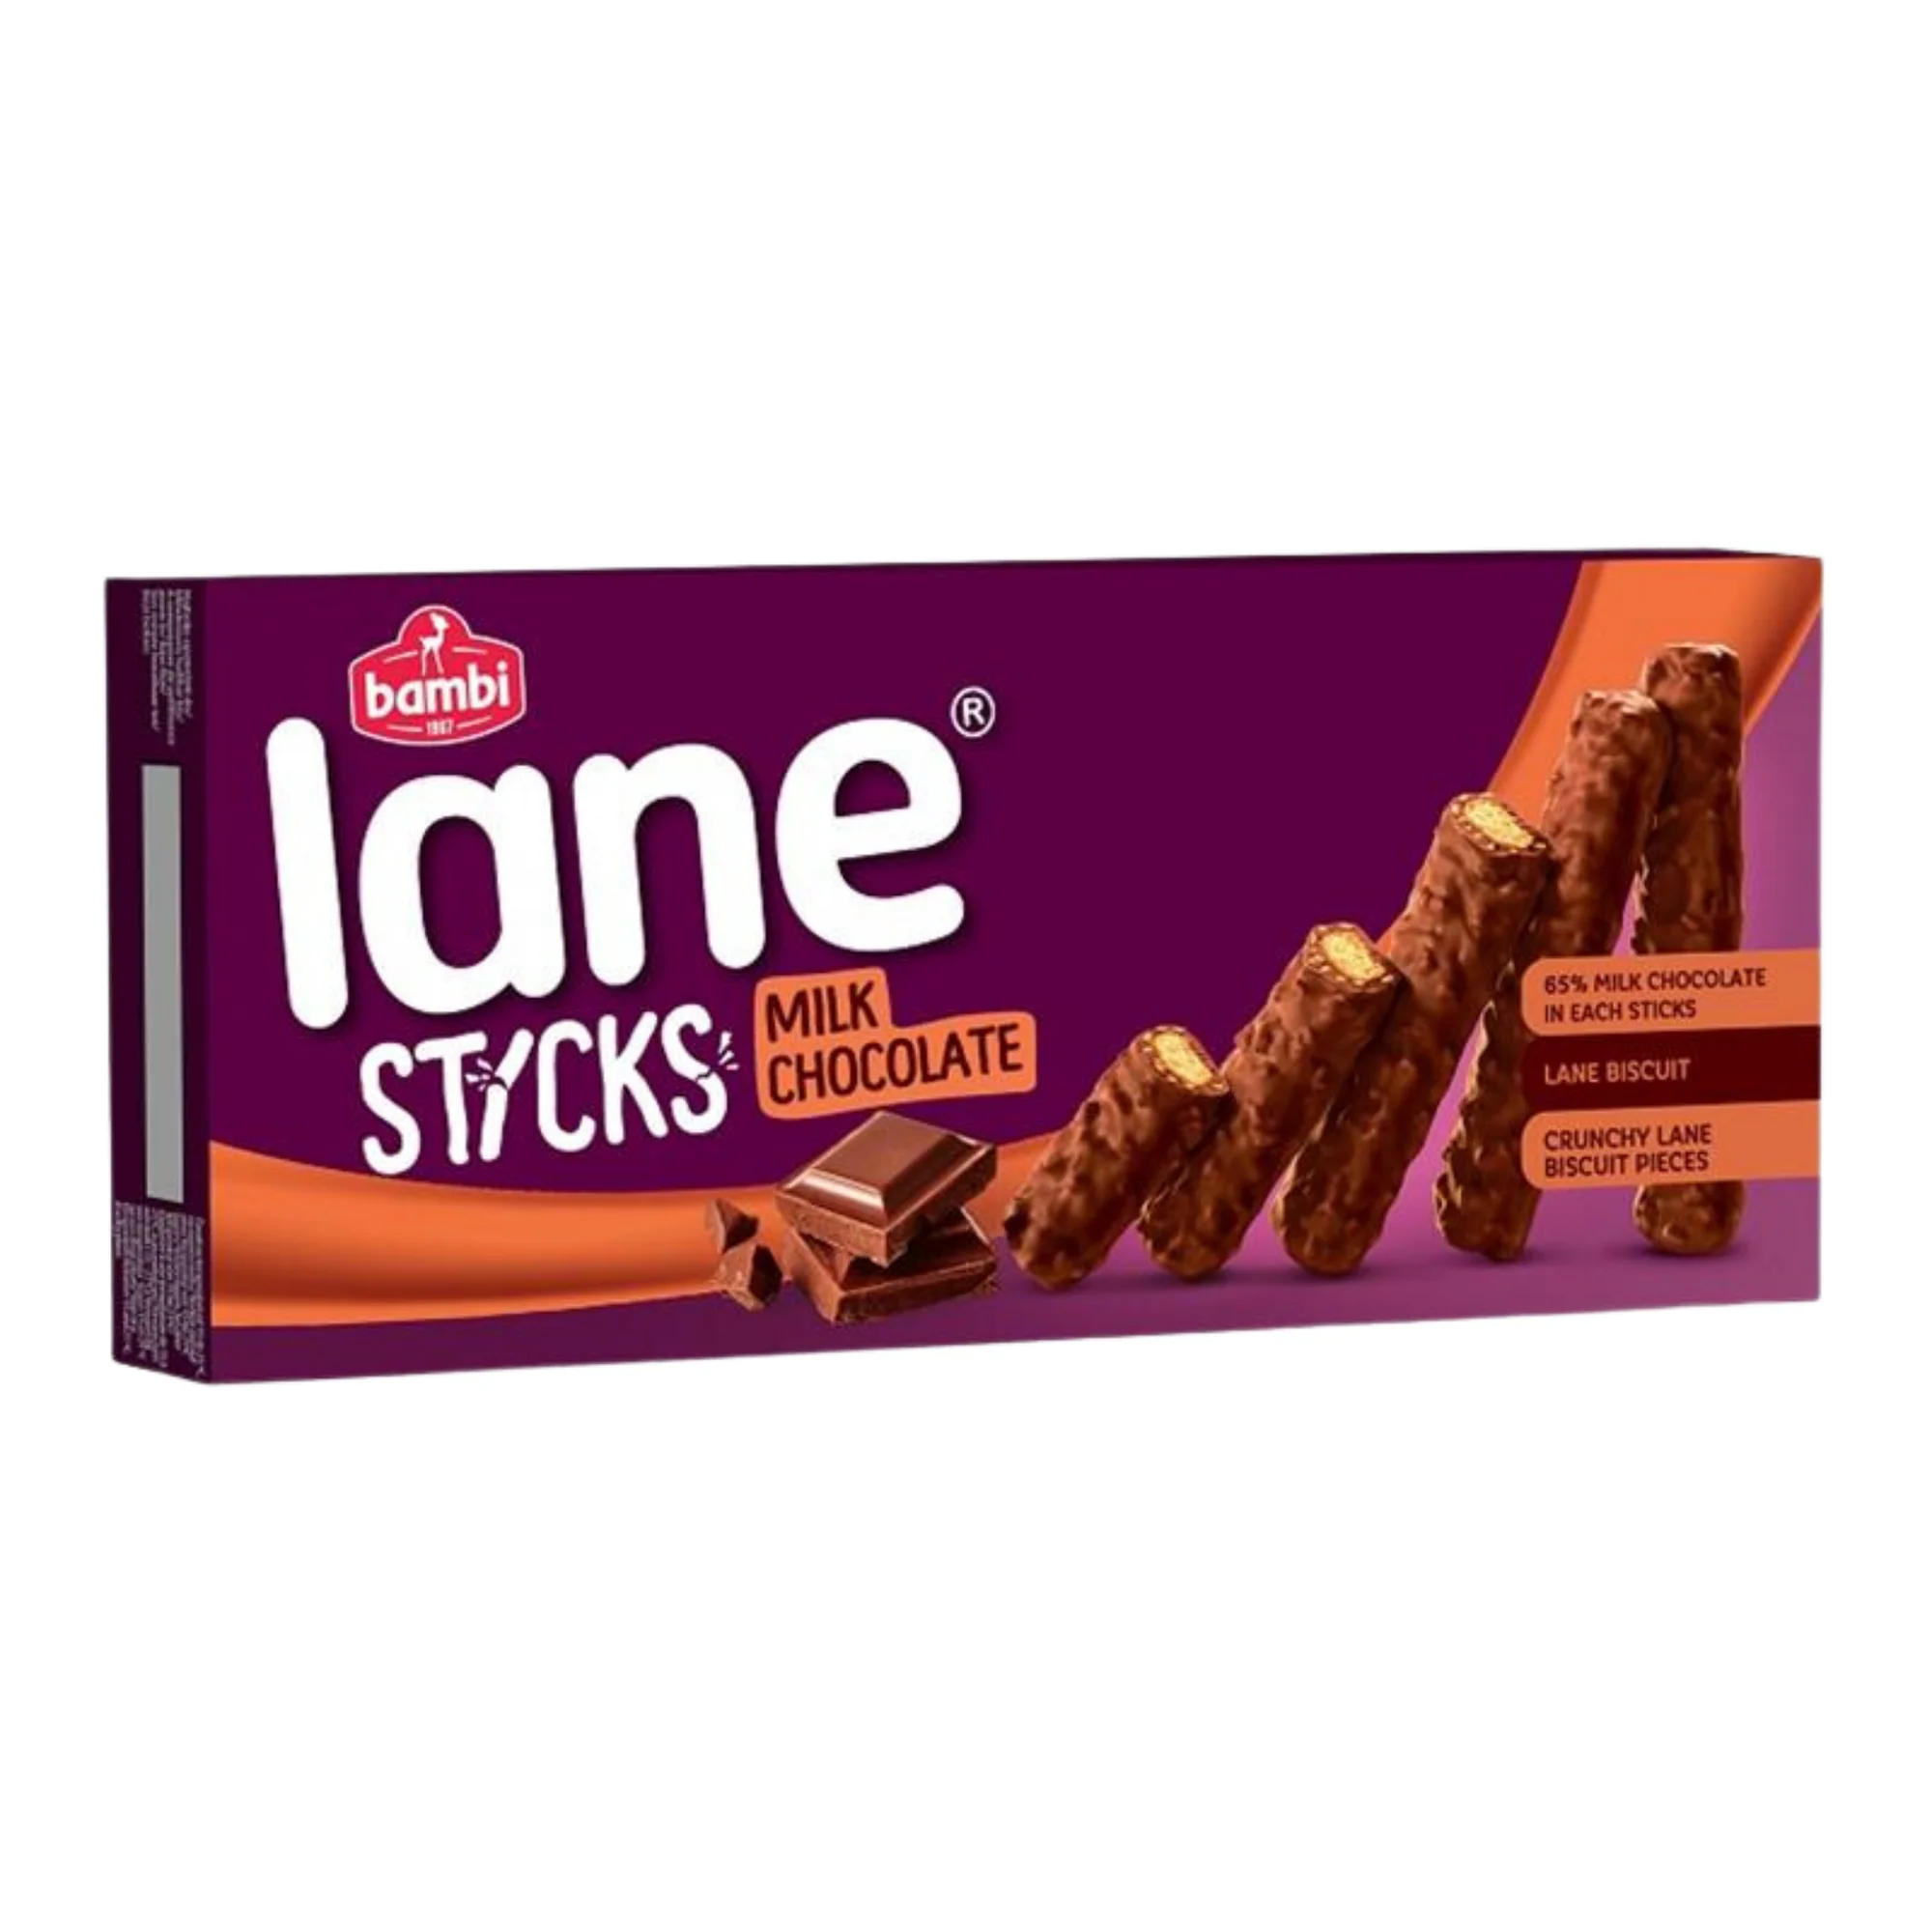 LANE sticks - coated biscuits